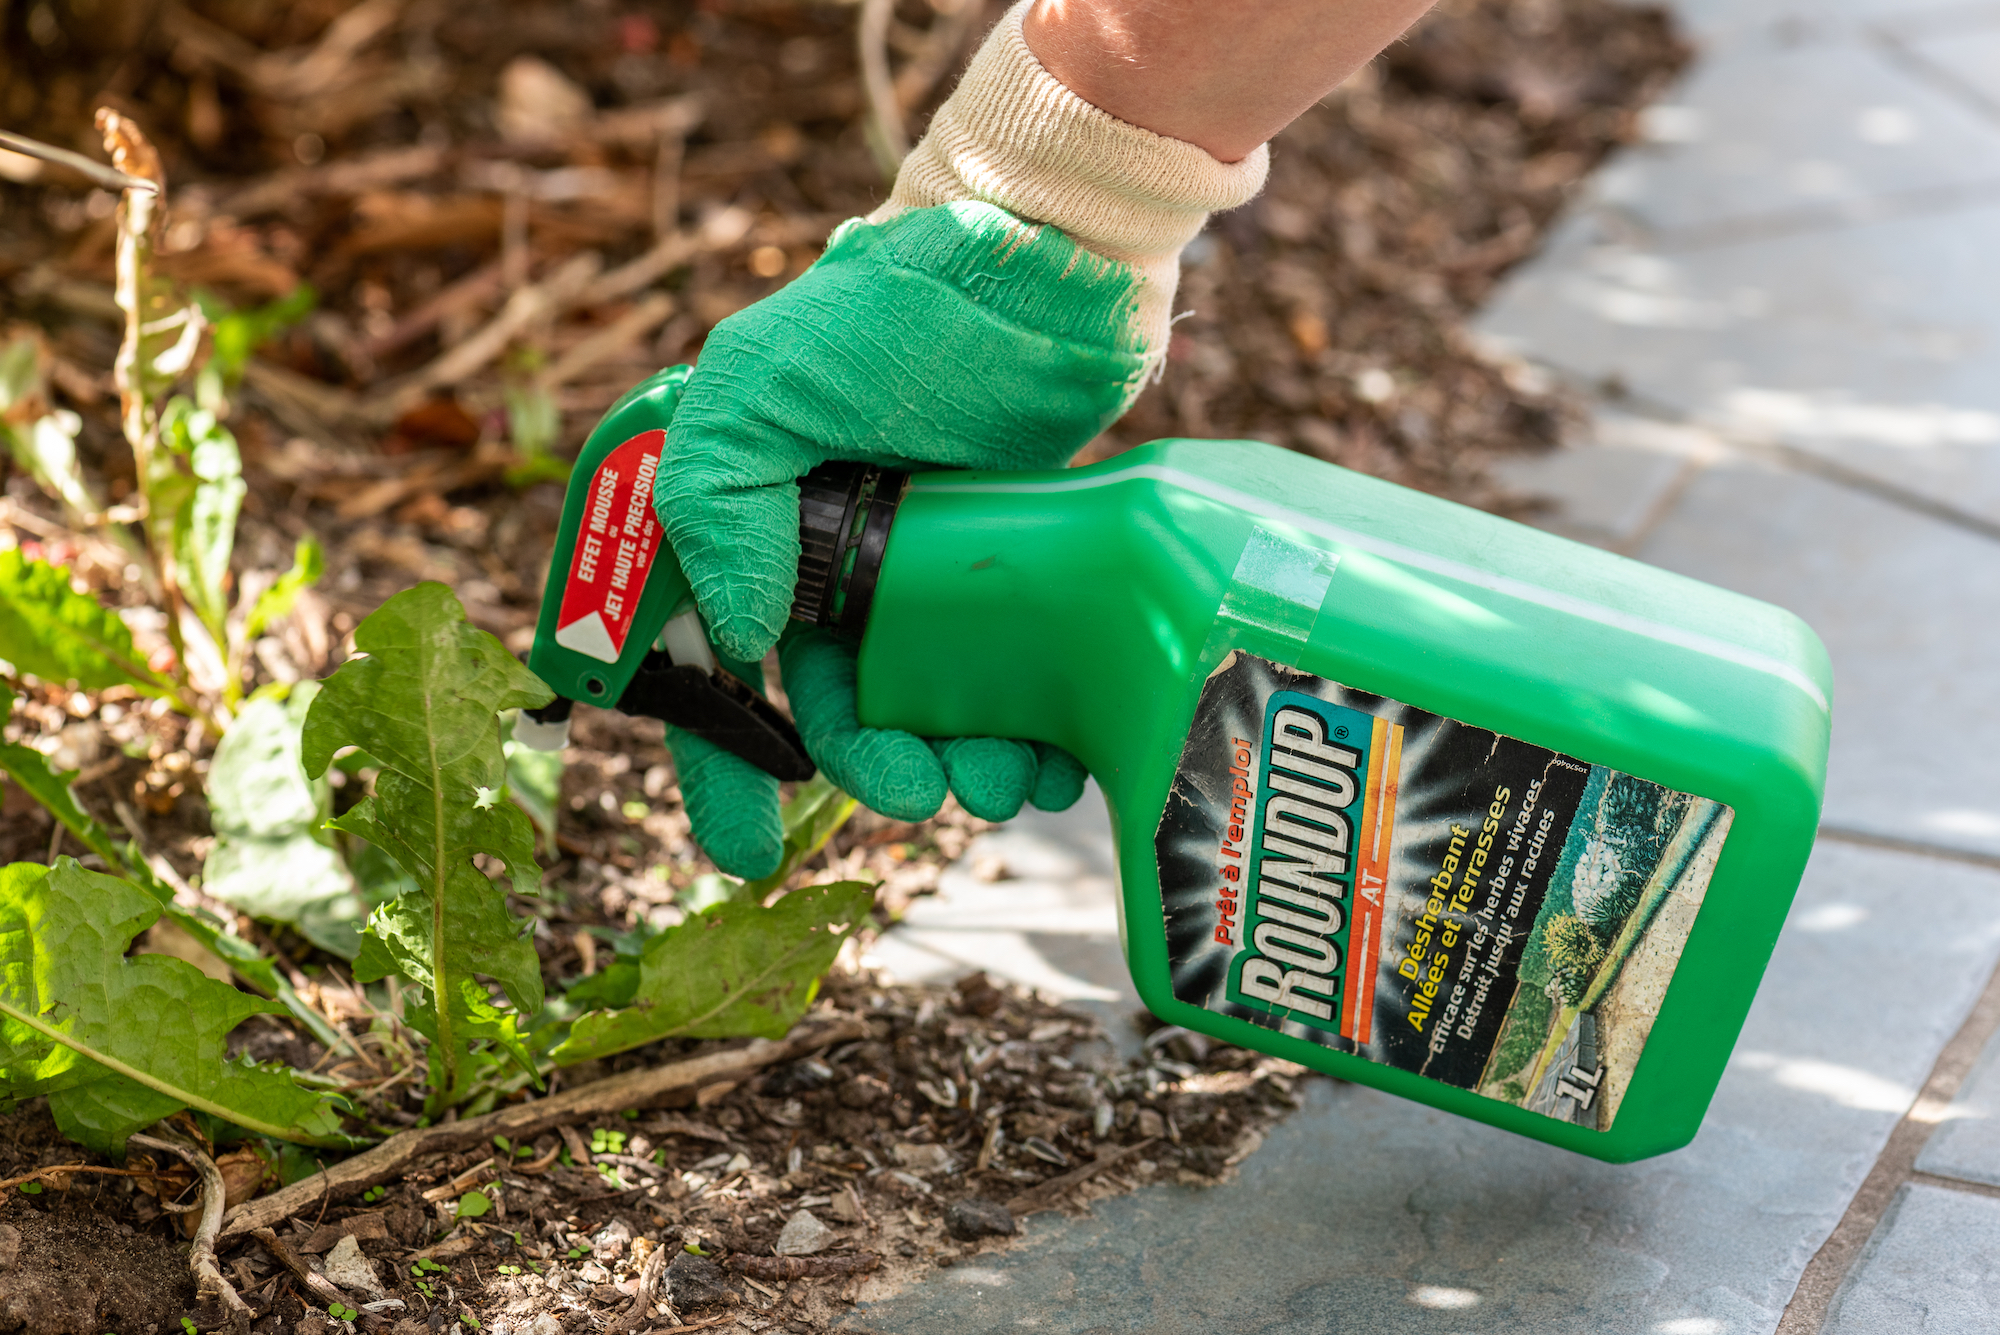 Roundup weed killer being sprayed | product liability attorney